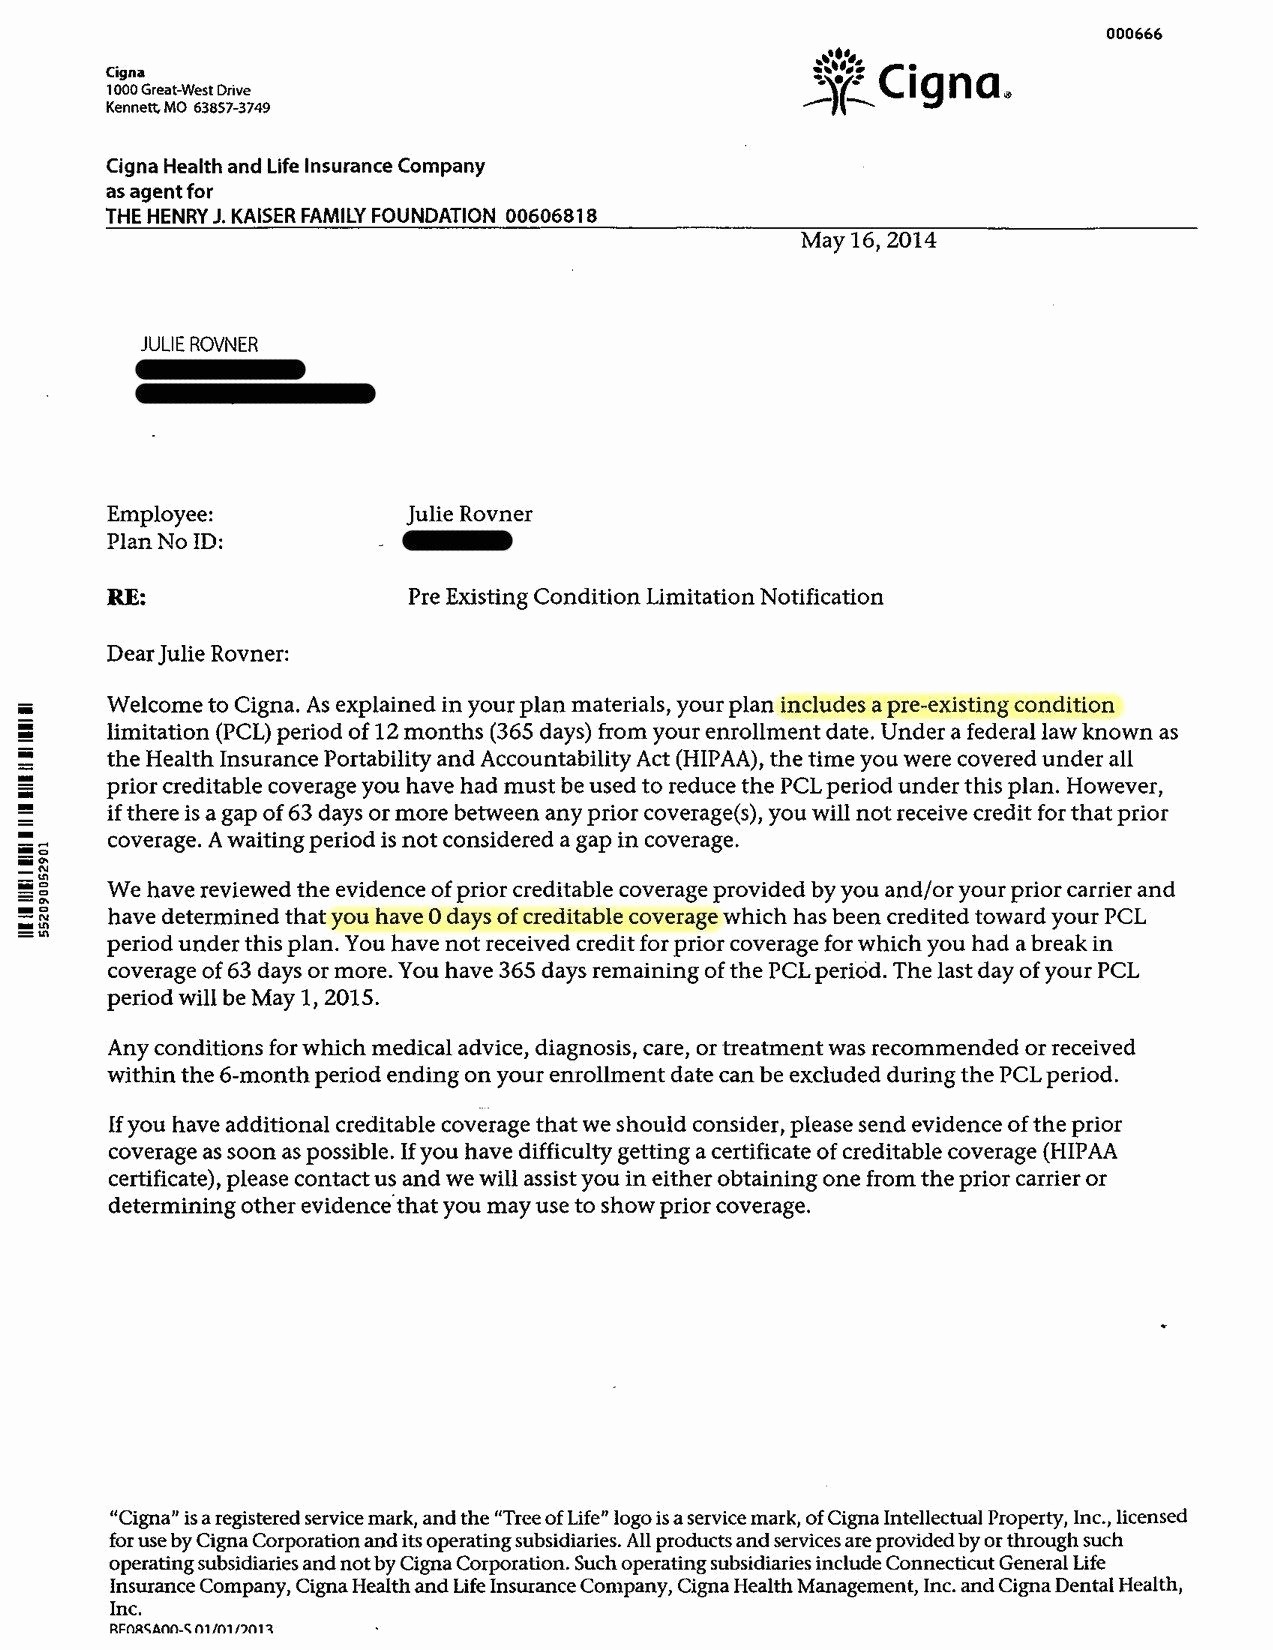 Proof Of Insurance Geico Luxury Letter DOCUMENTS